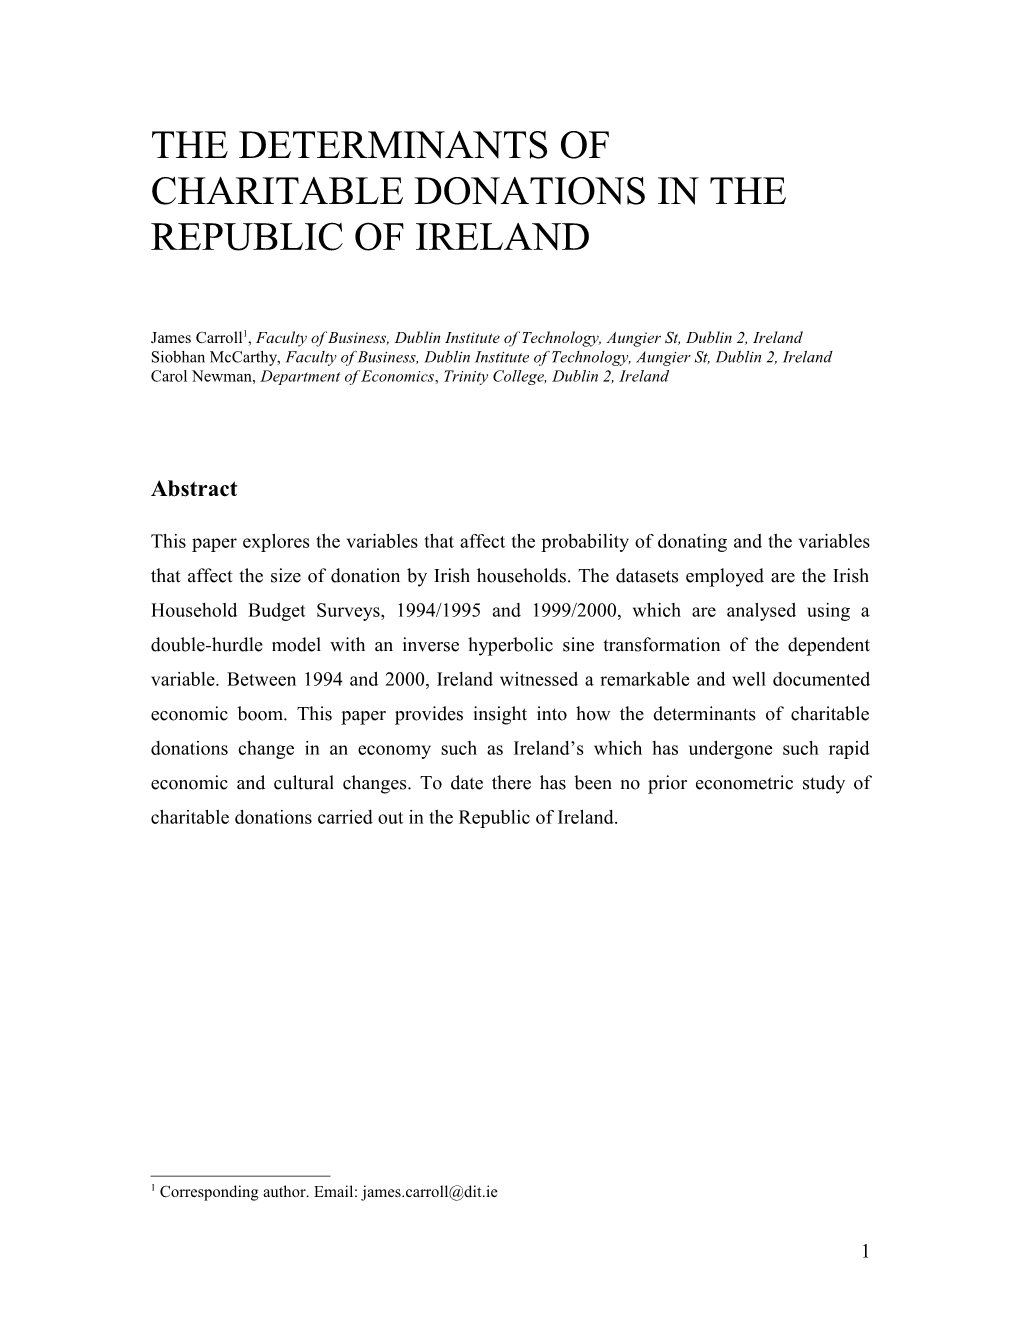 The Determinants of Charitable Donations in the Republic of Ireland